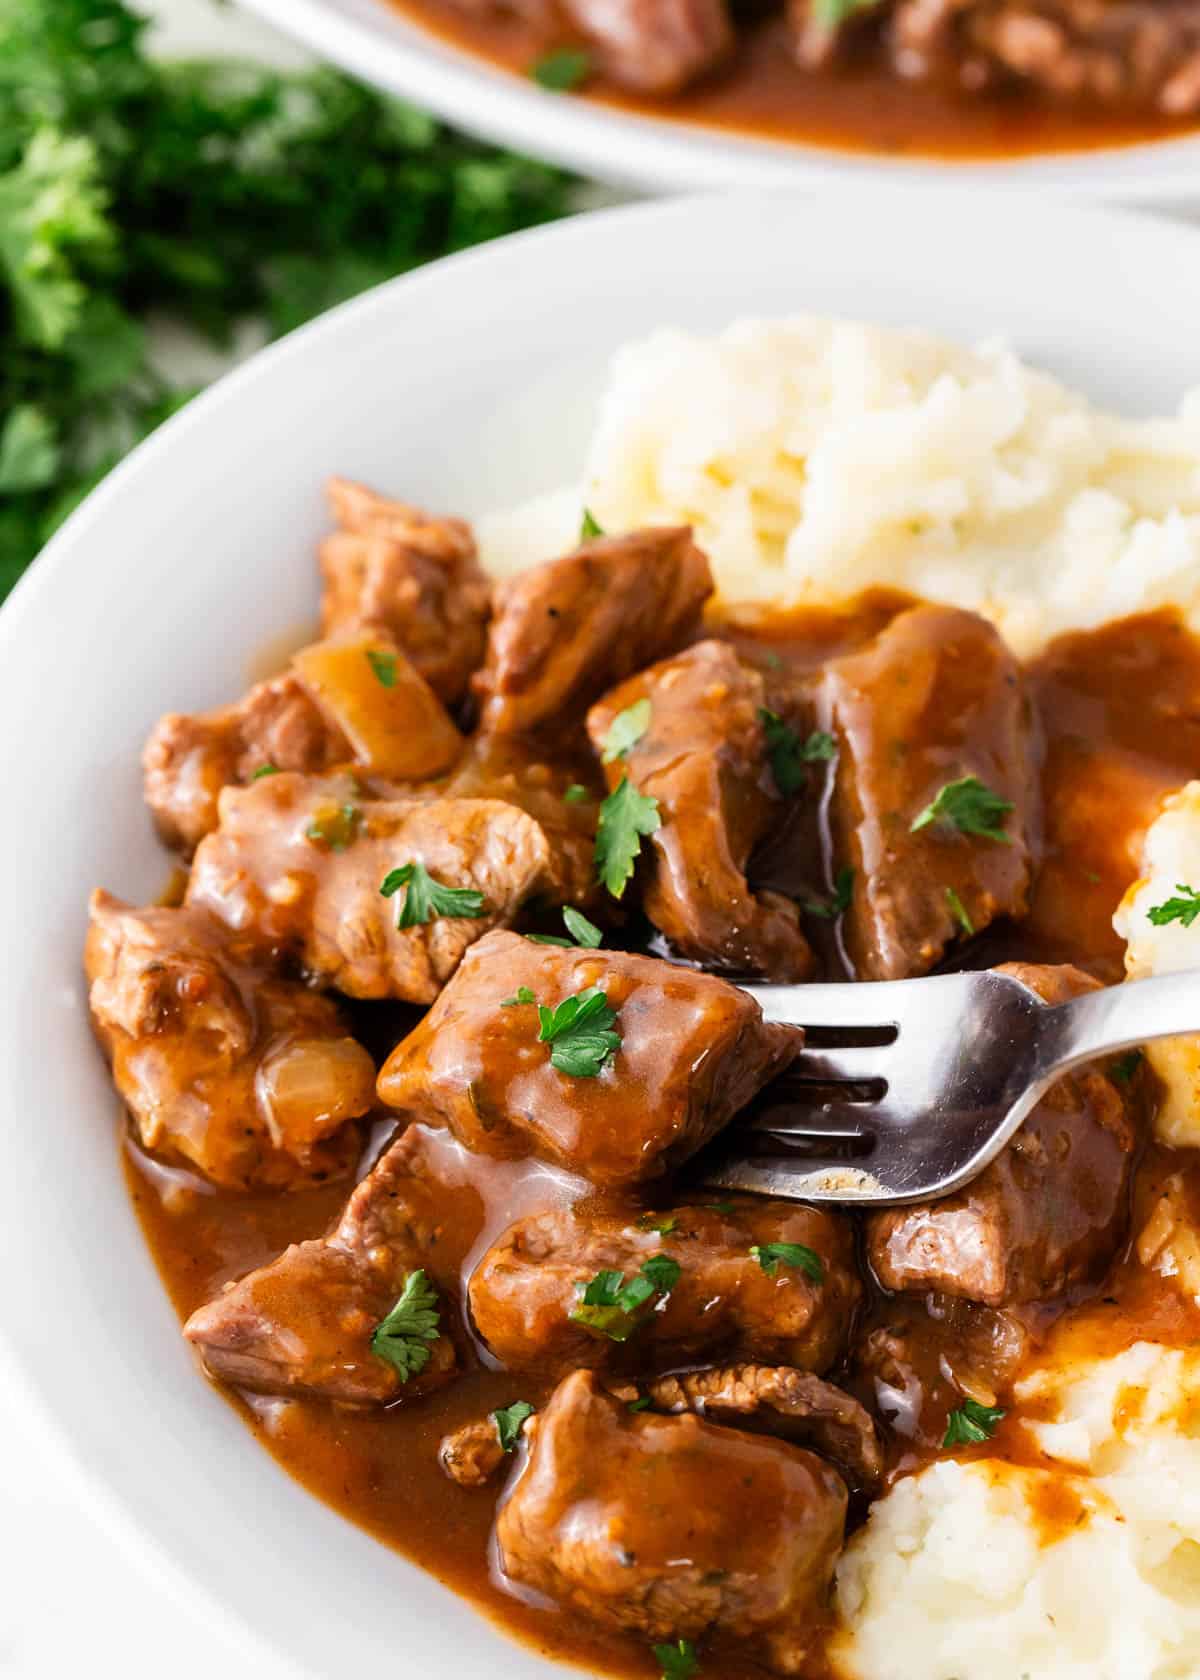 Beef tips and mashed potatoes in bowl.